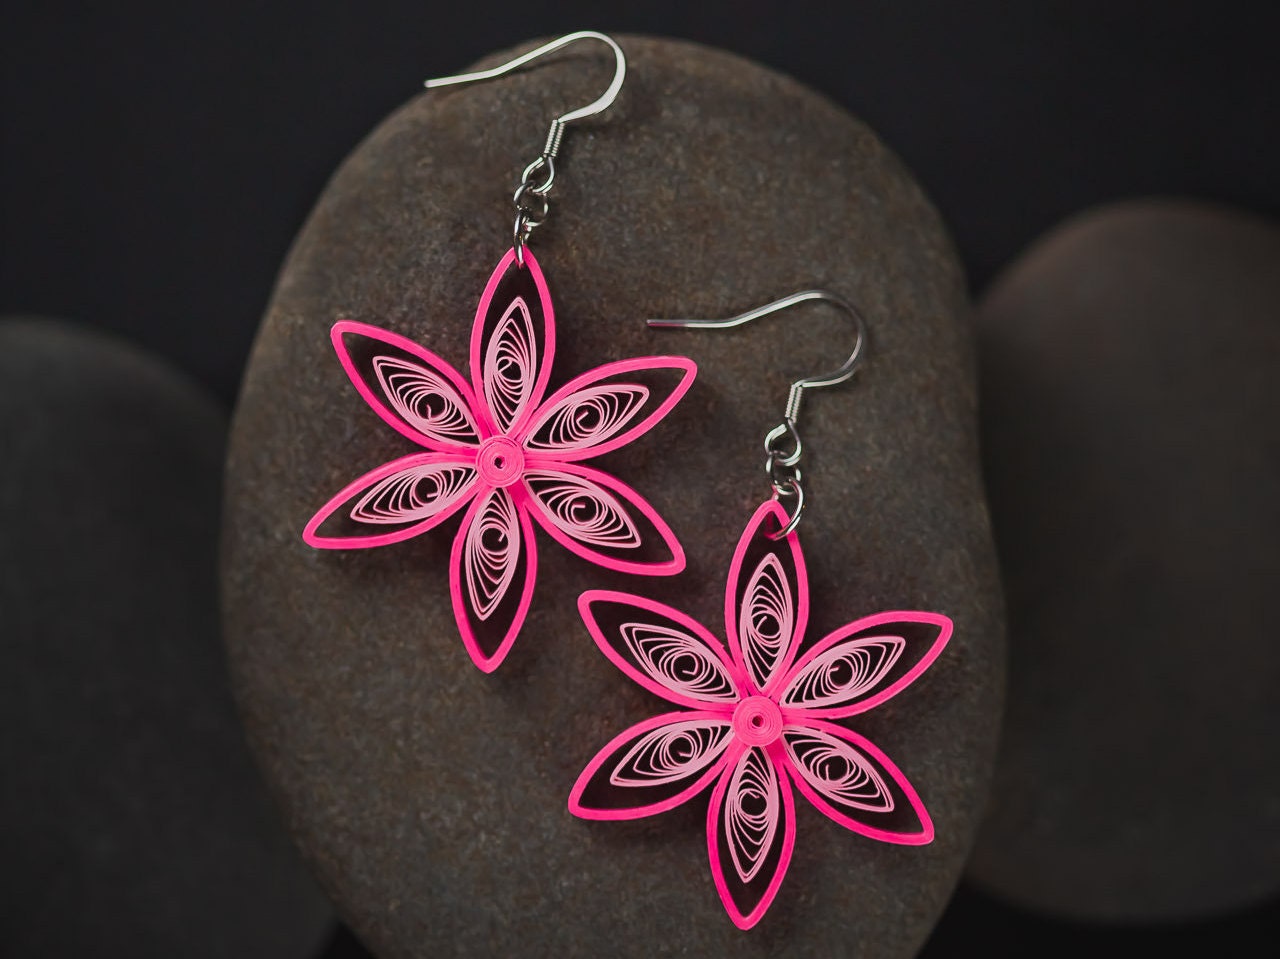 DAYDREAMS: Quilled earring tutorial